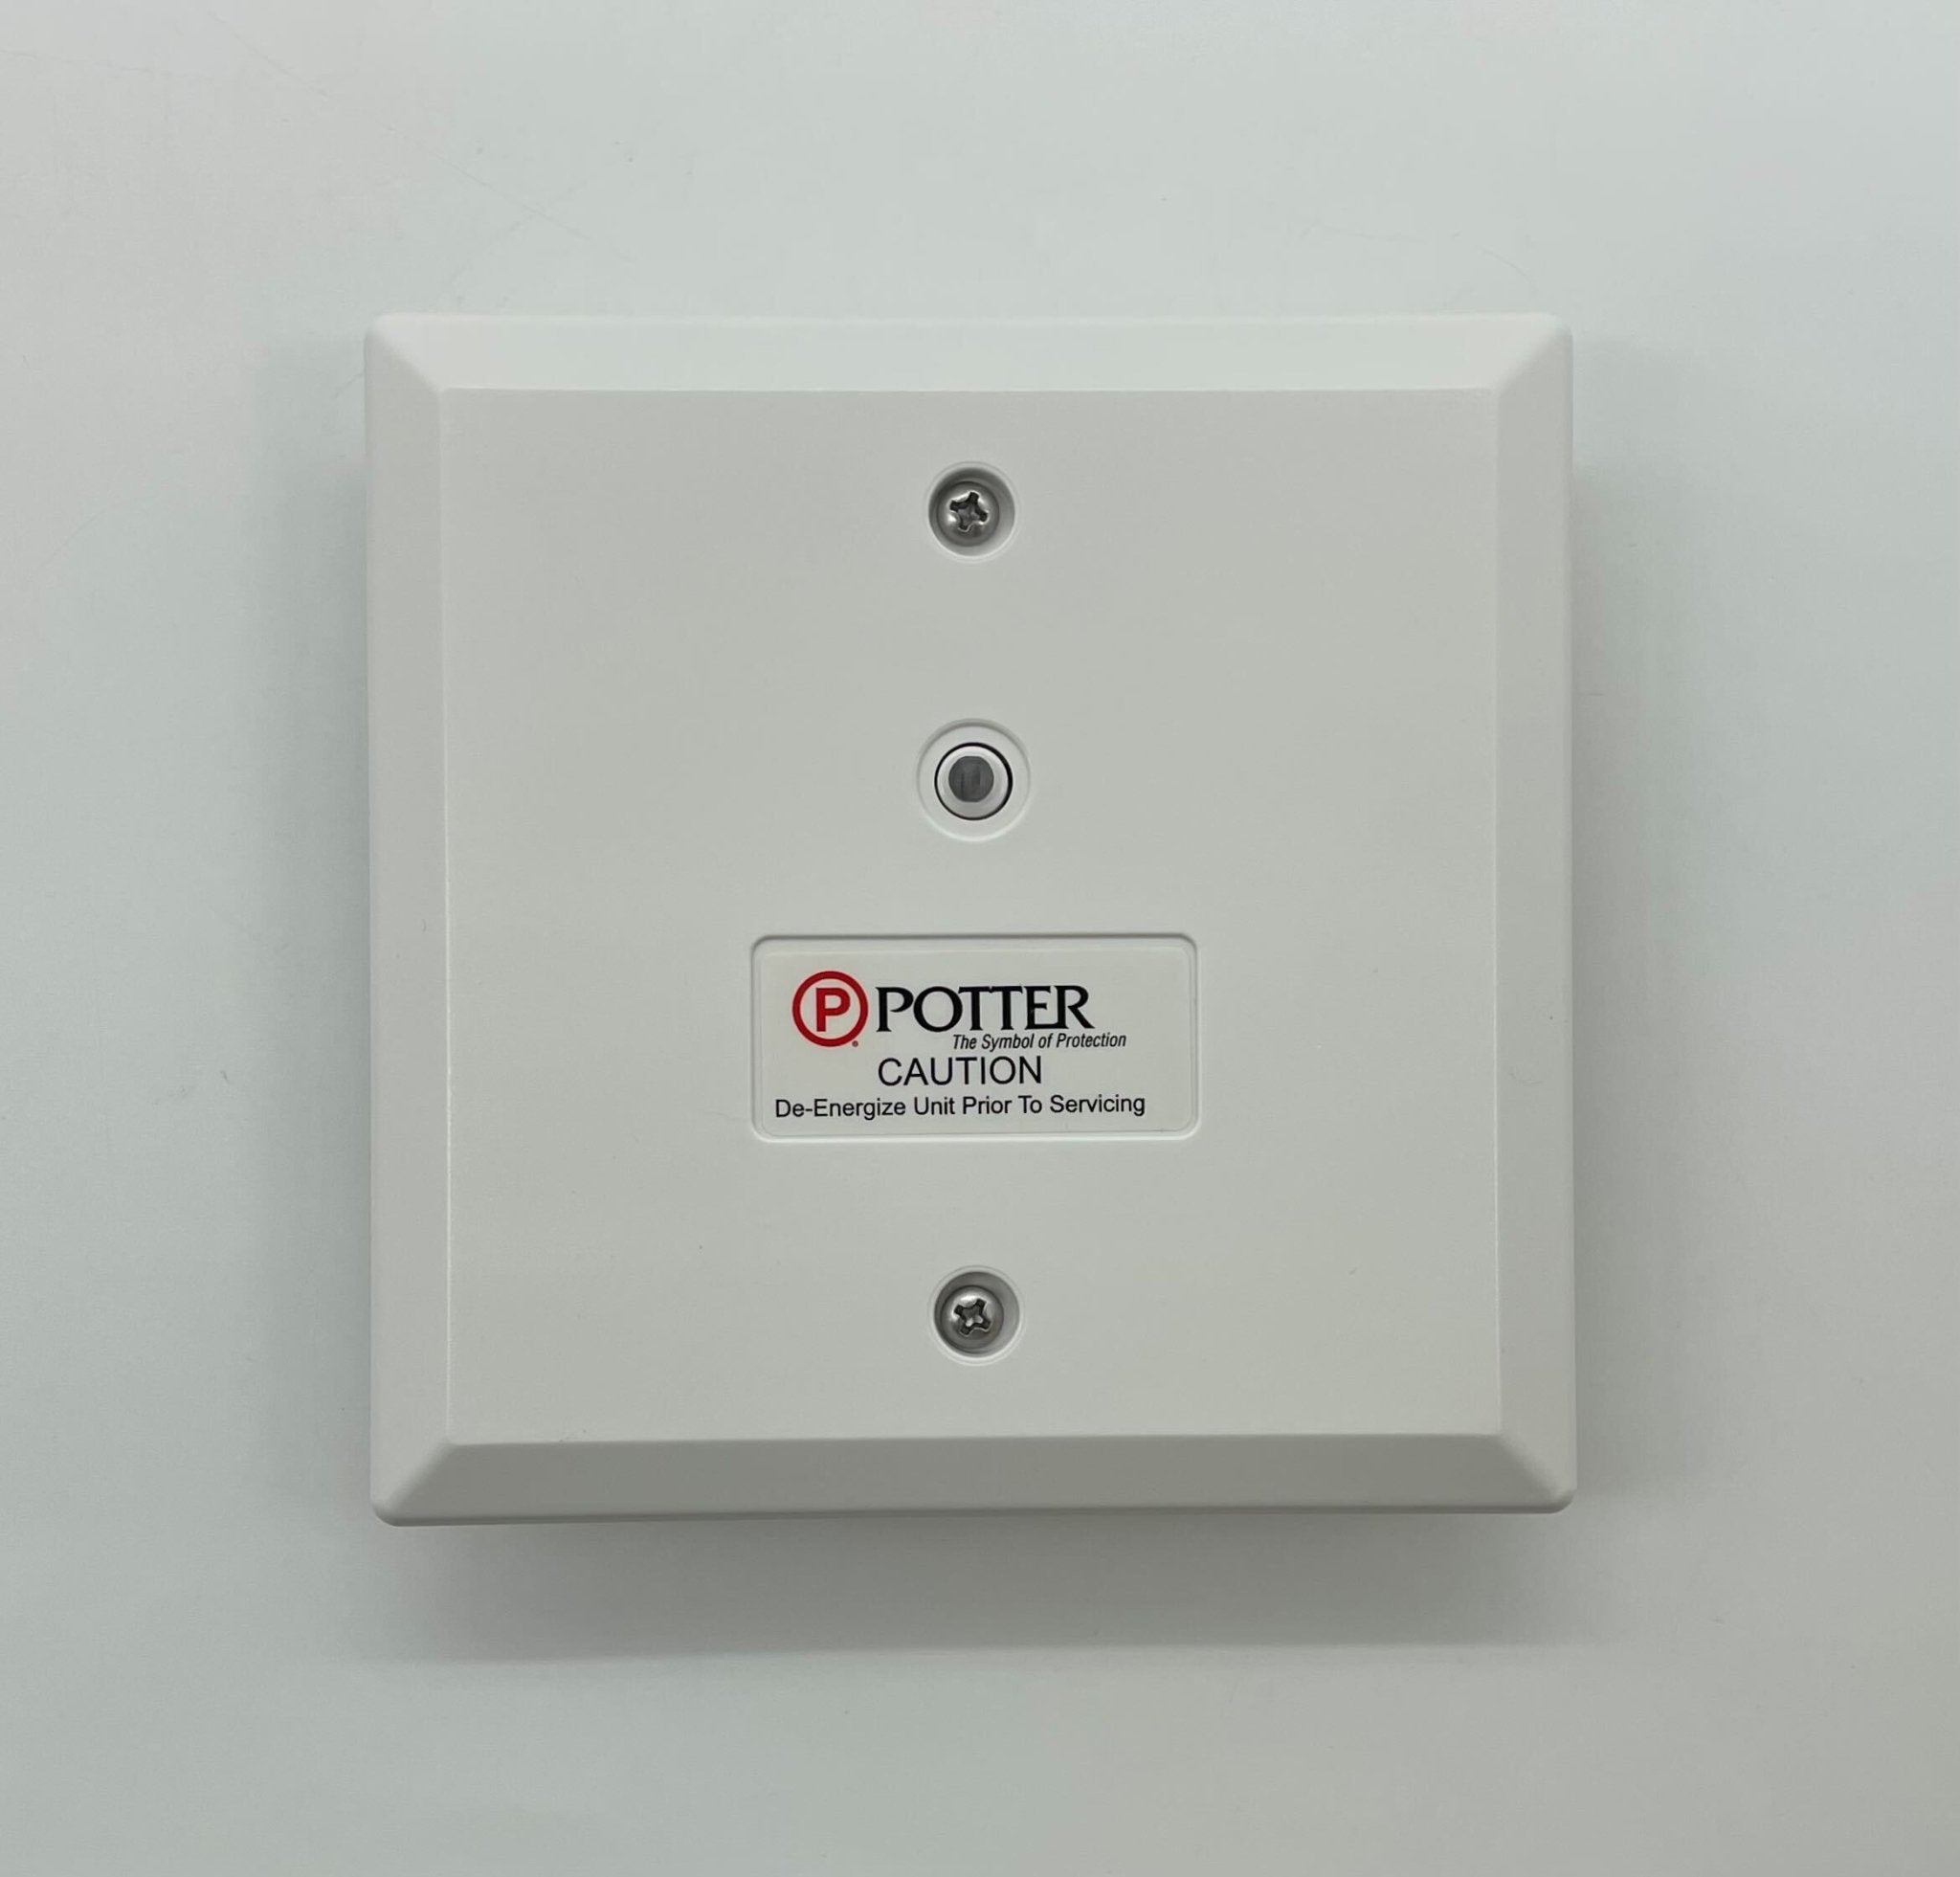 Potter PAD 100-LED - The Fire Alarm Supplier